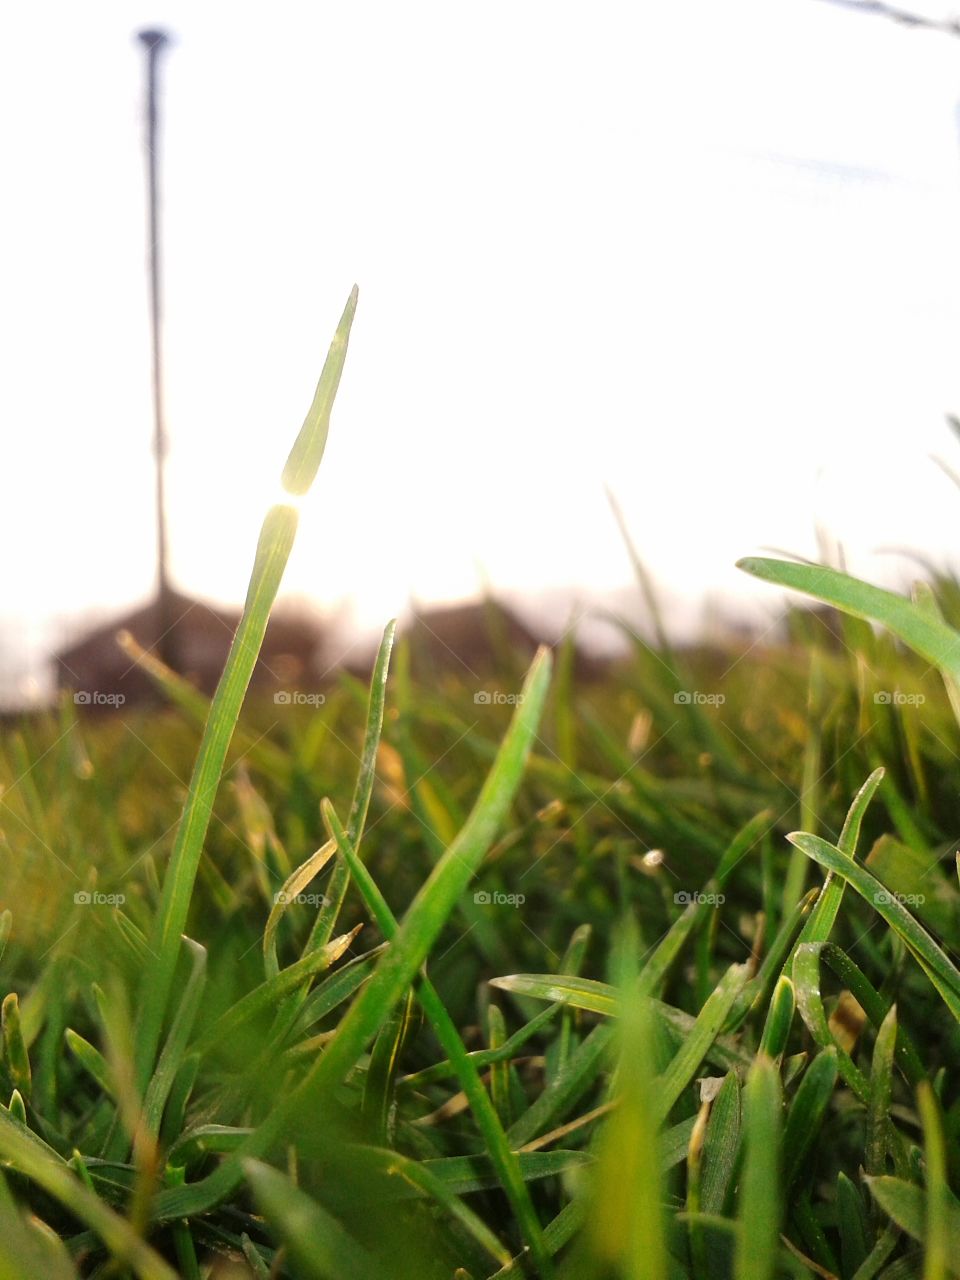 Grass close-up. I was relaxing outside the house and I took a photo of grass in the sun's rays.